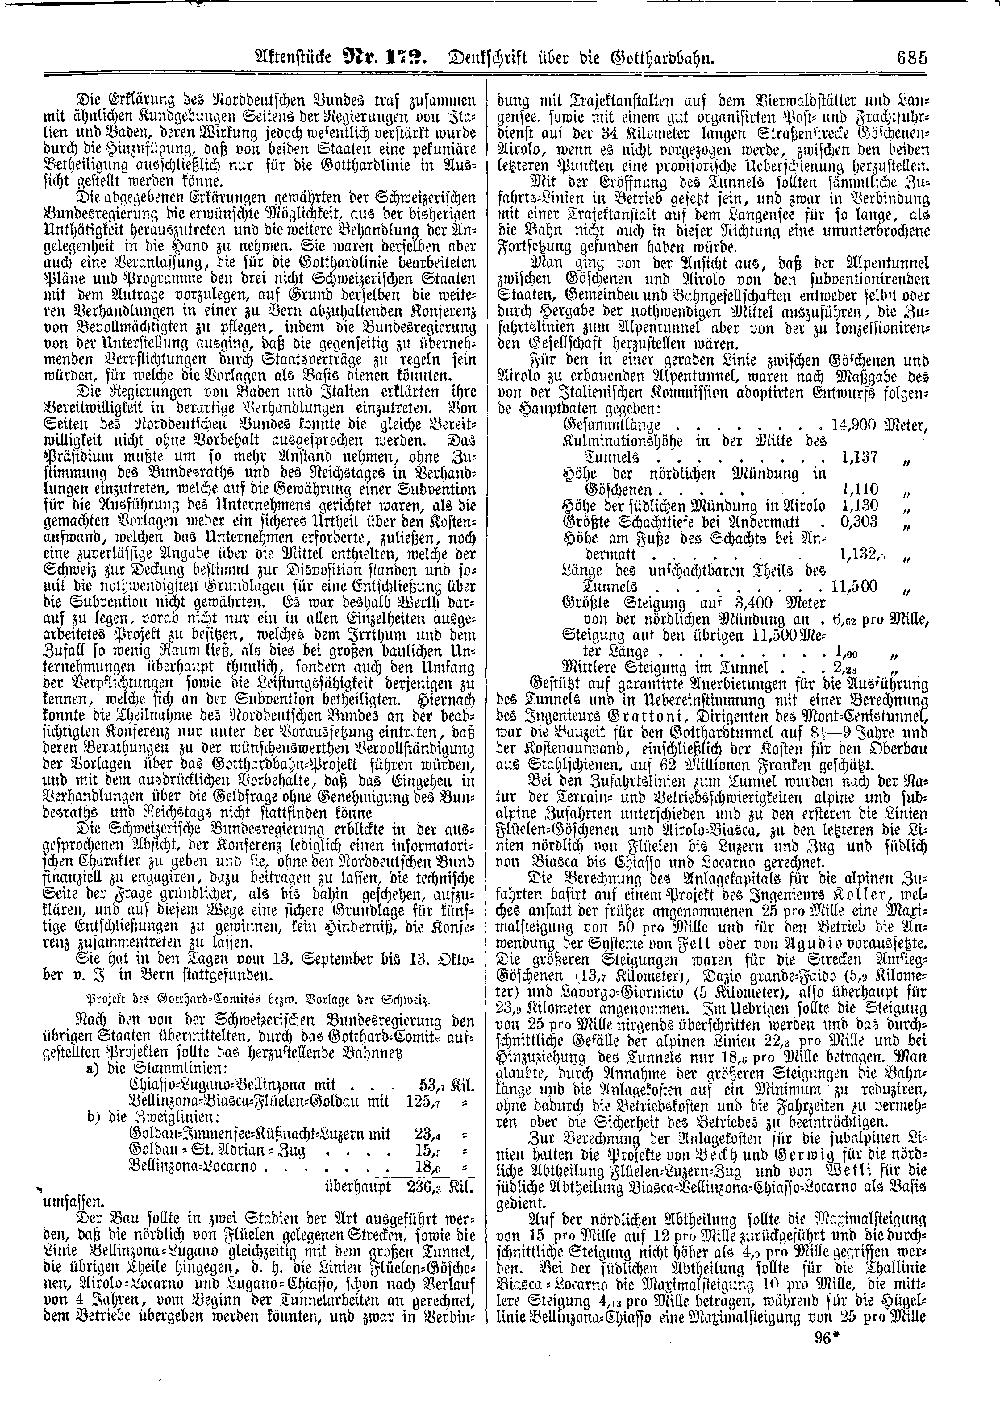 Scan of page 685